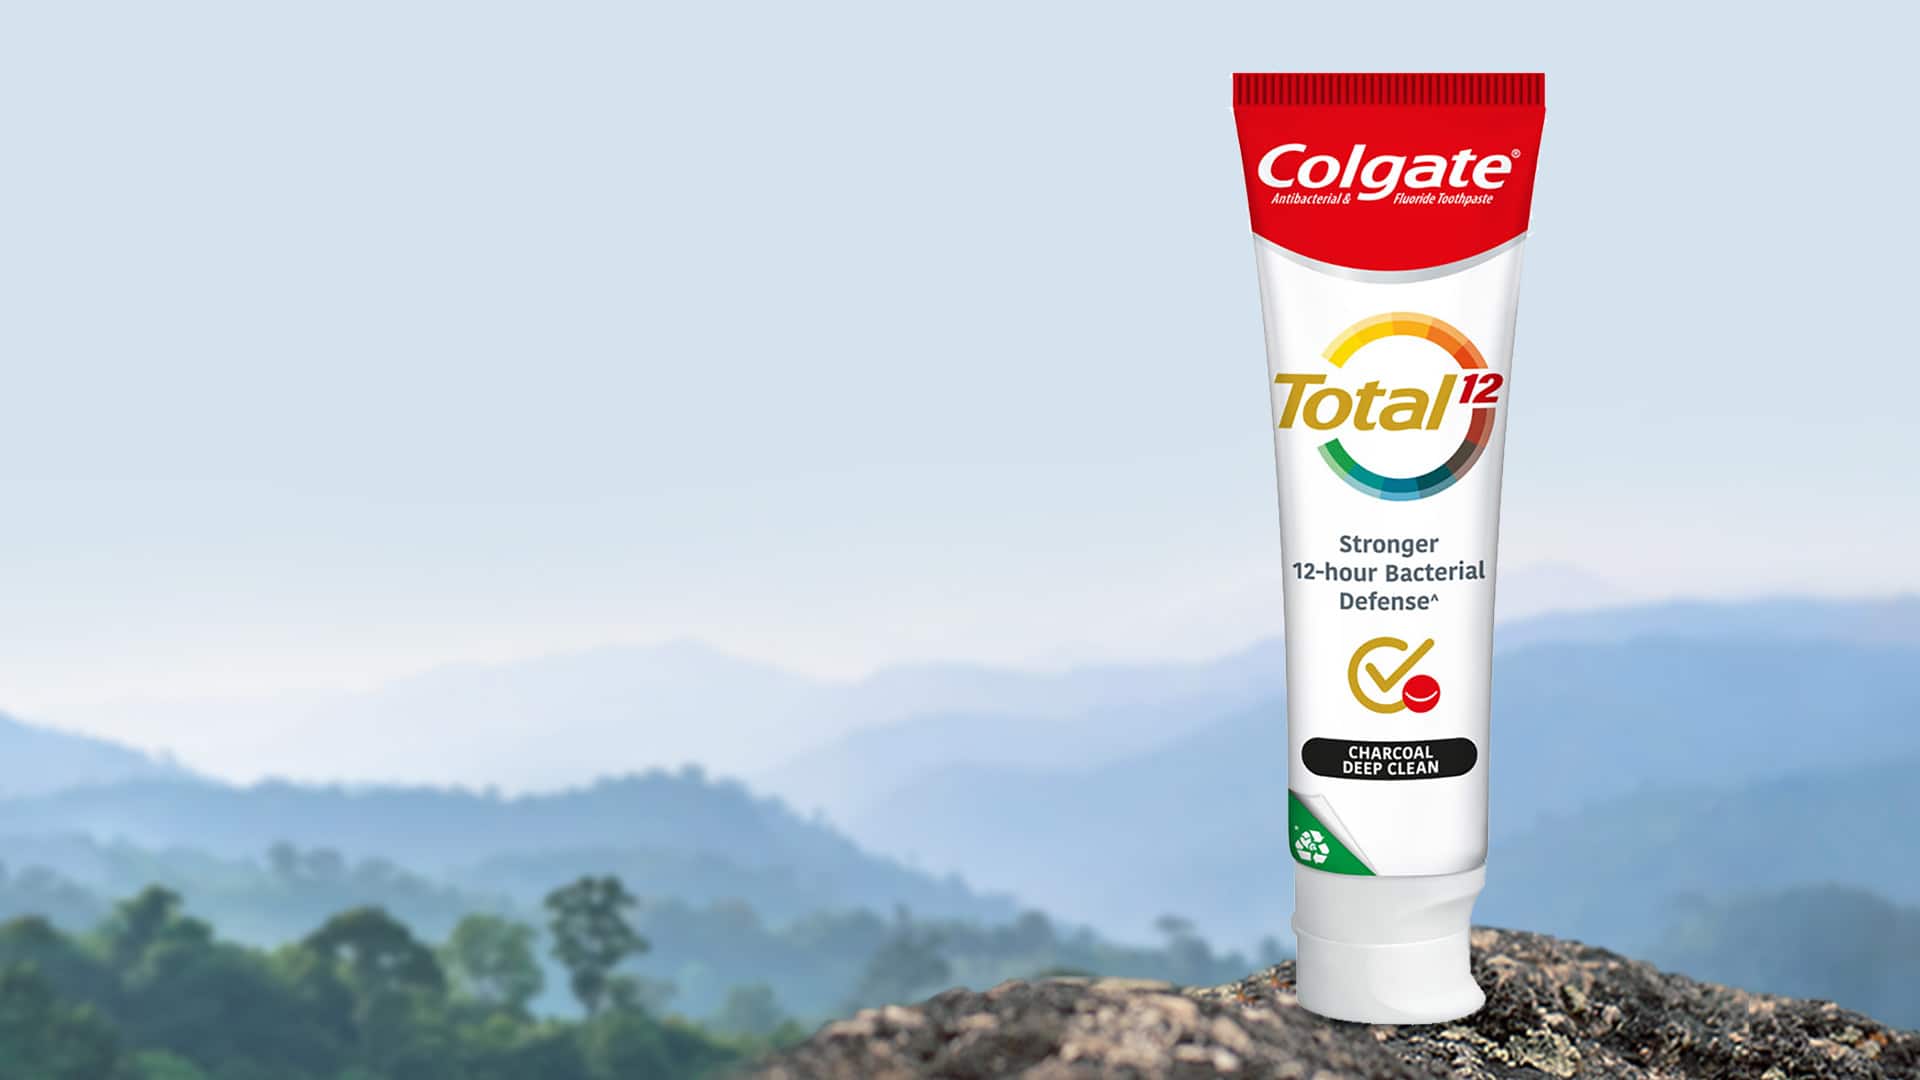 Colgate Total Plaque Release | Superior & Advanced Plaque Removal Technology | Release 3X more plaque and help fortifies gum 